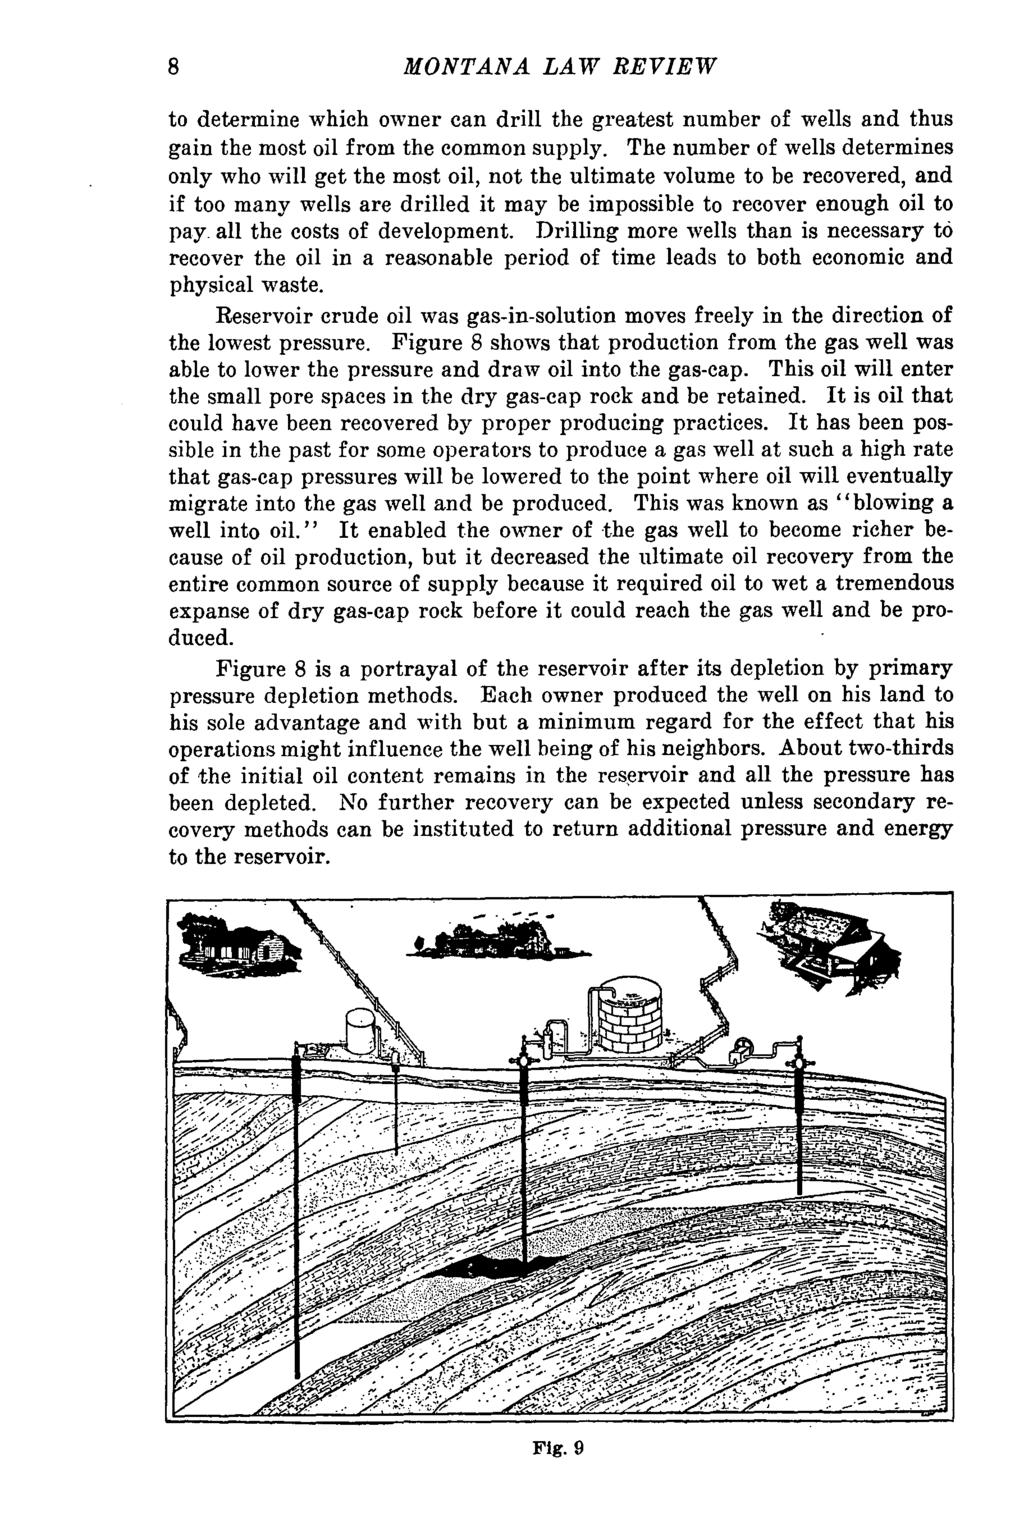 Montana Law MONTANA Review, Vol. 17 LAW [1955], Iss. REVIEW 1, Art. 1 to determine which owner can drill the greatest number of wells and thus gain the most oil from the common supply.